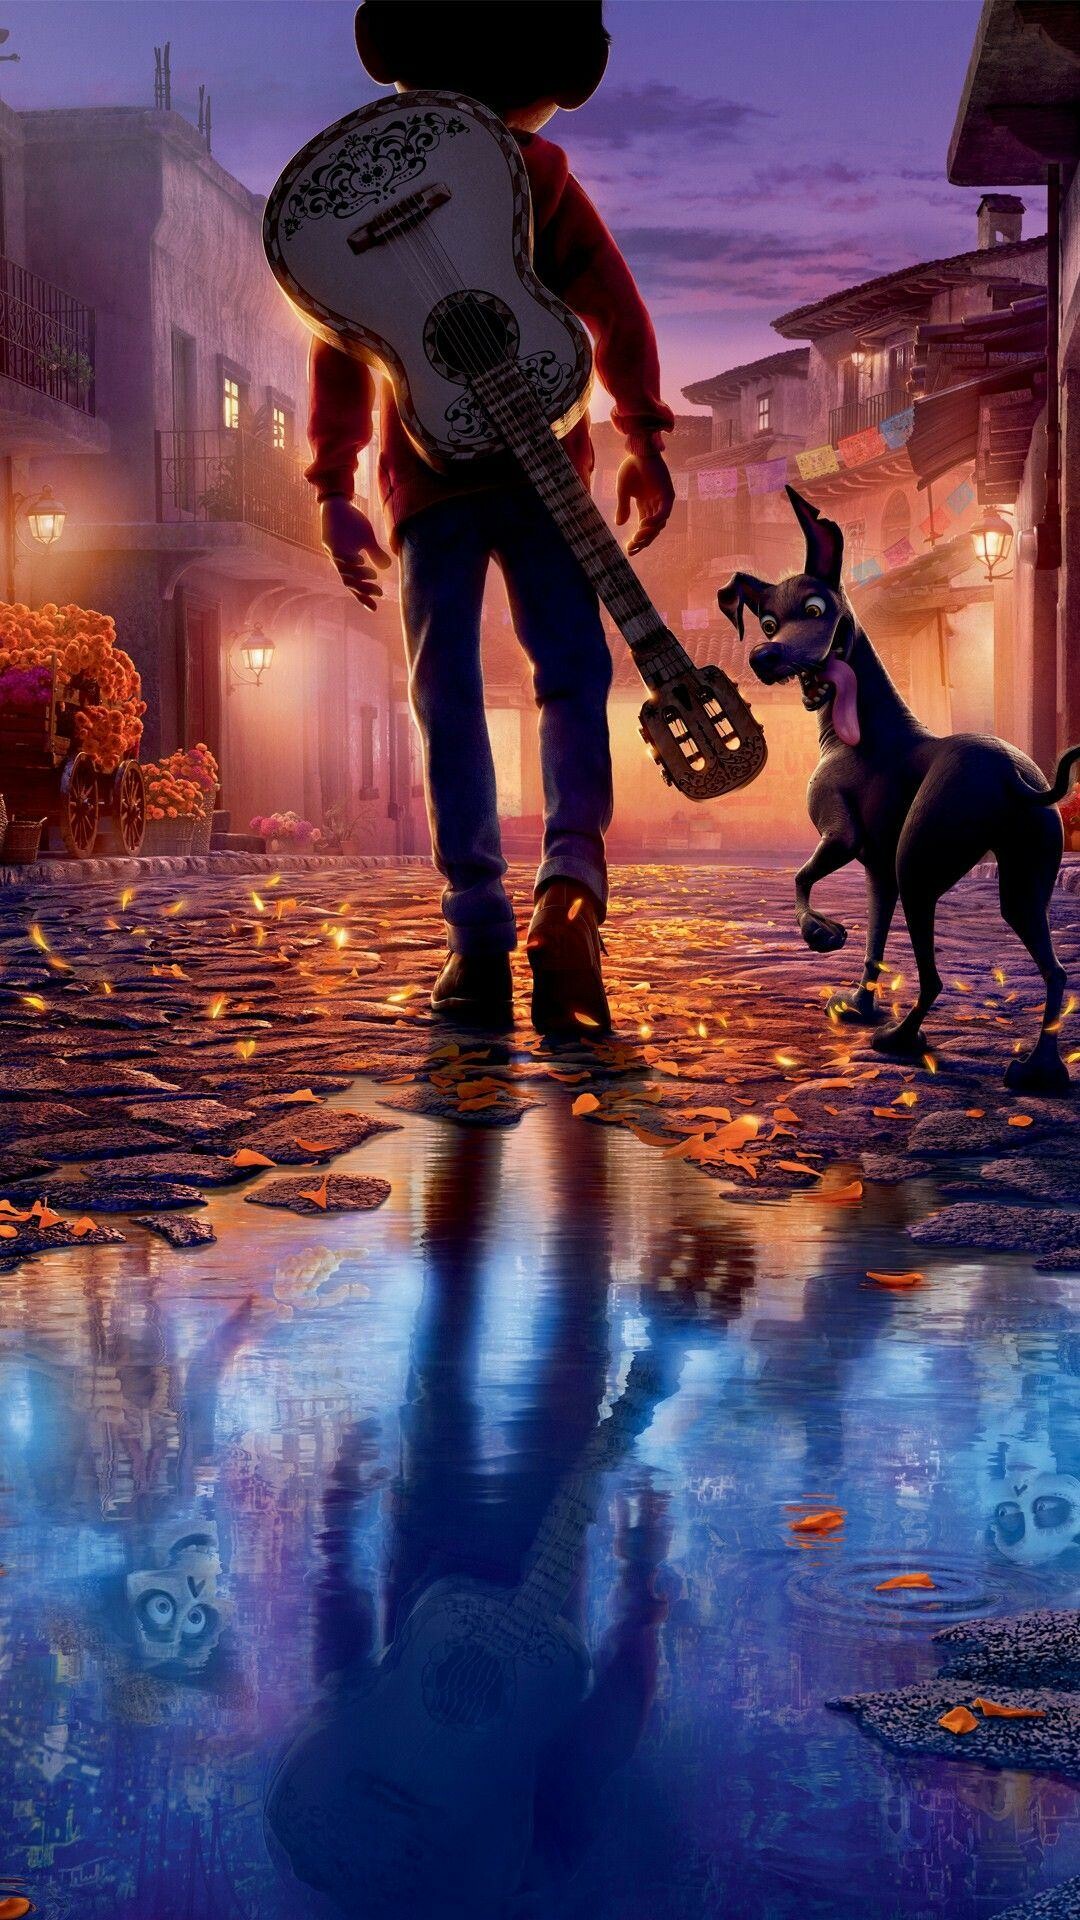 Coco (Cartoon): A 2017 American 3D computer-animated musical fantasy drama film produced by Pixar Animation Studios. 1080x1920 Full HD Background.